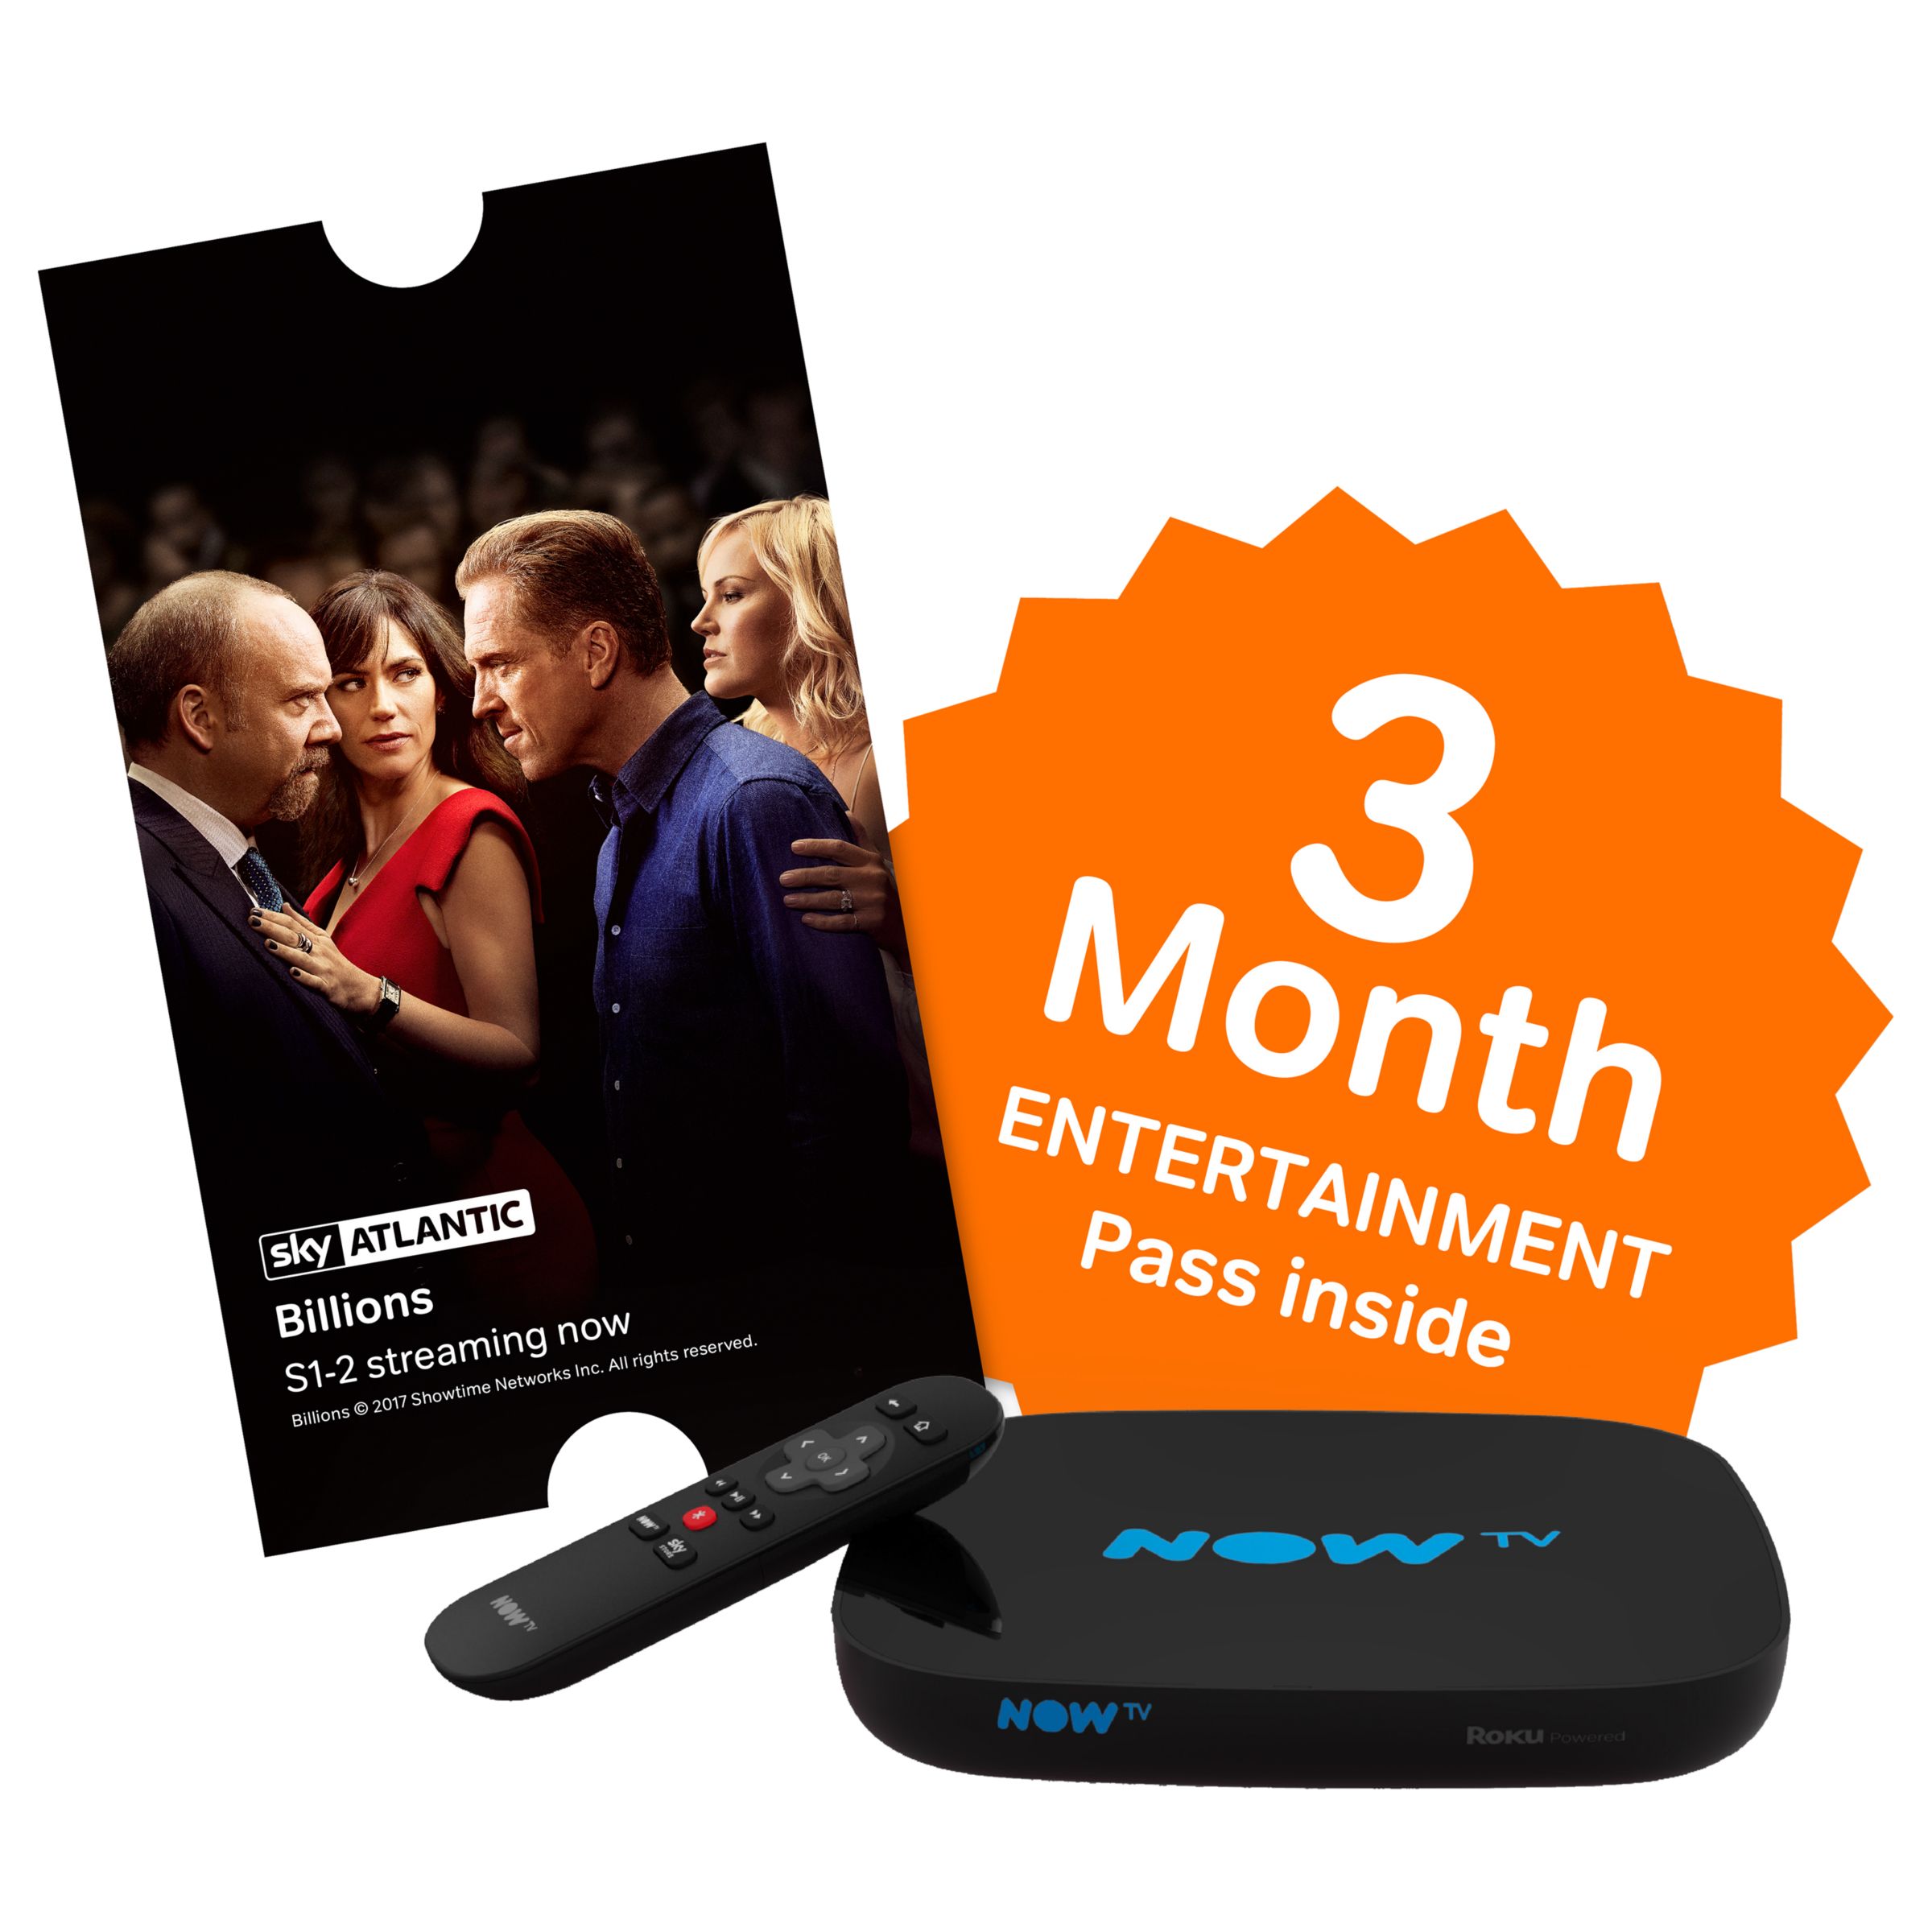 NOW TV Smart TV Box with Pause & Rewind, with 3 Month Entertainment Pass,  Black